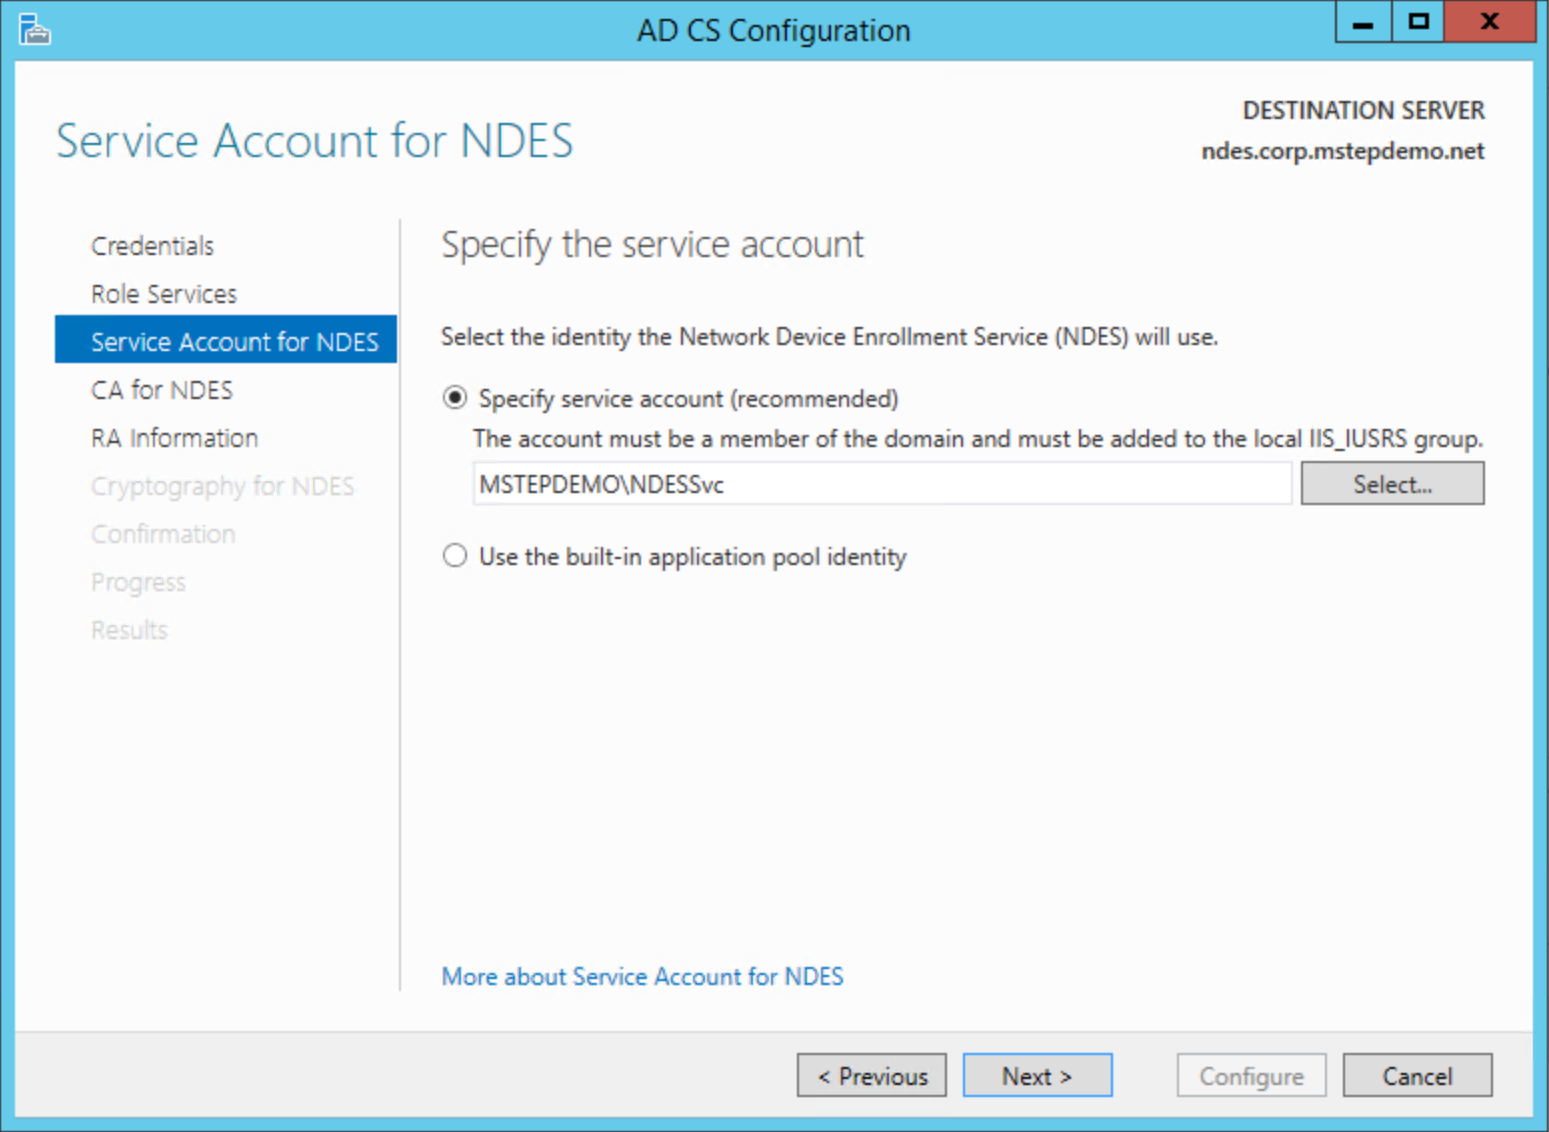 NDES Service Account for NDES.